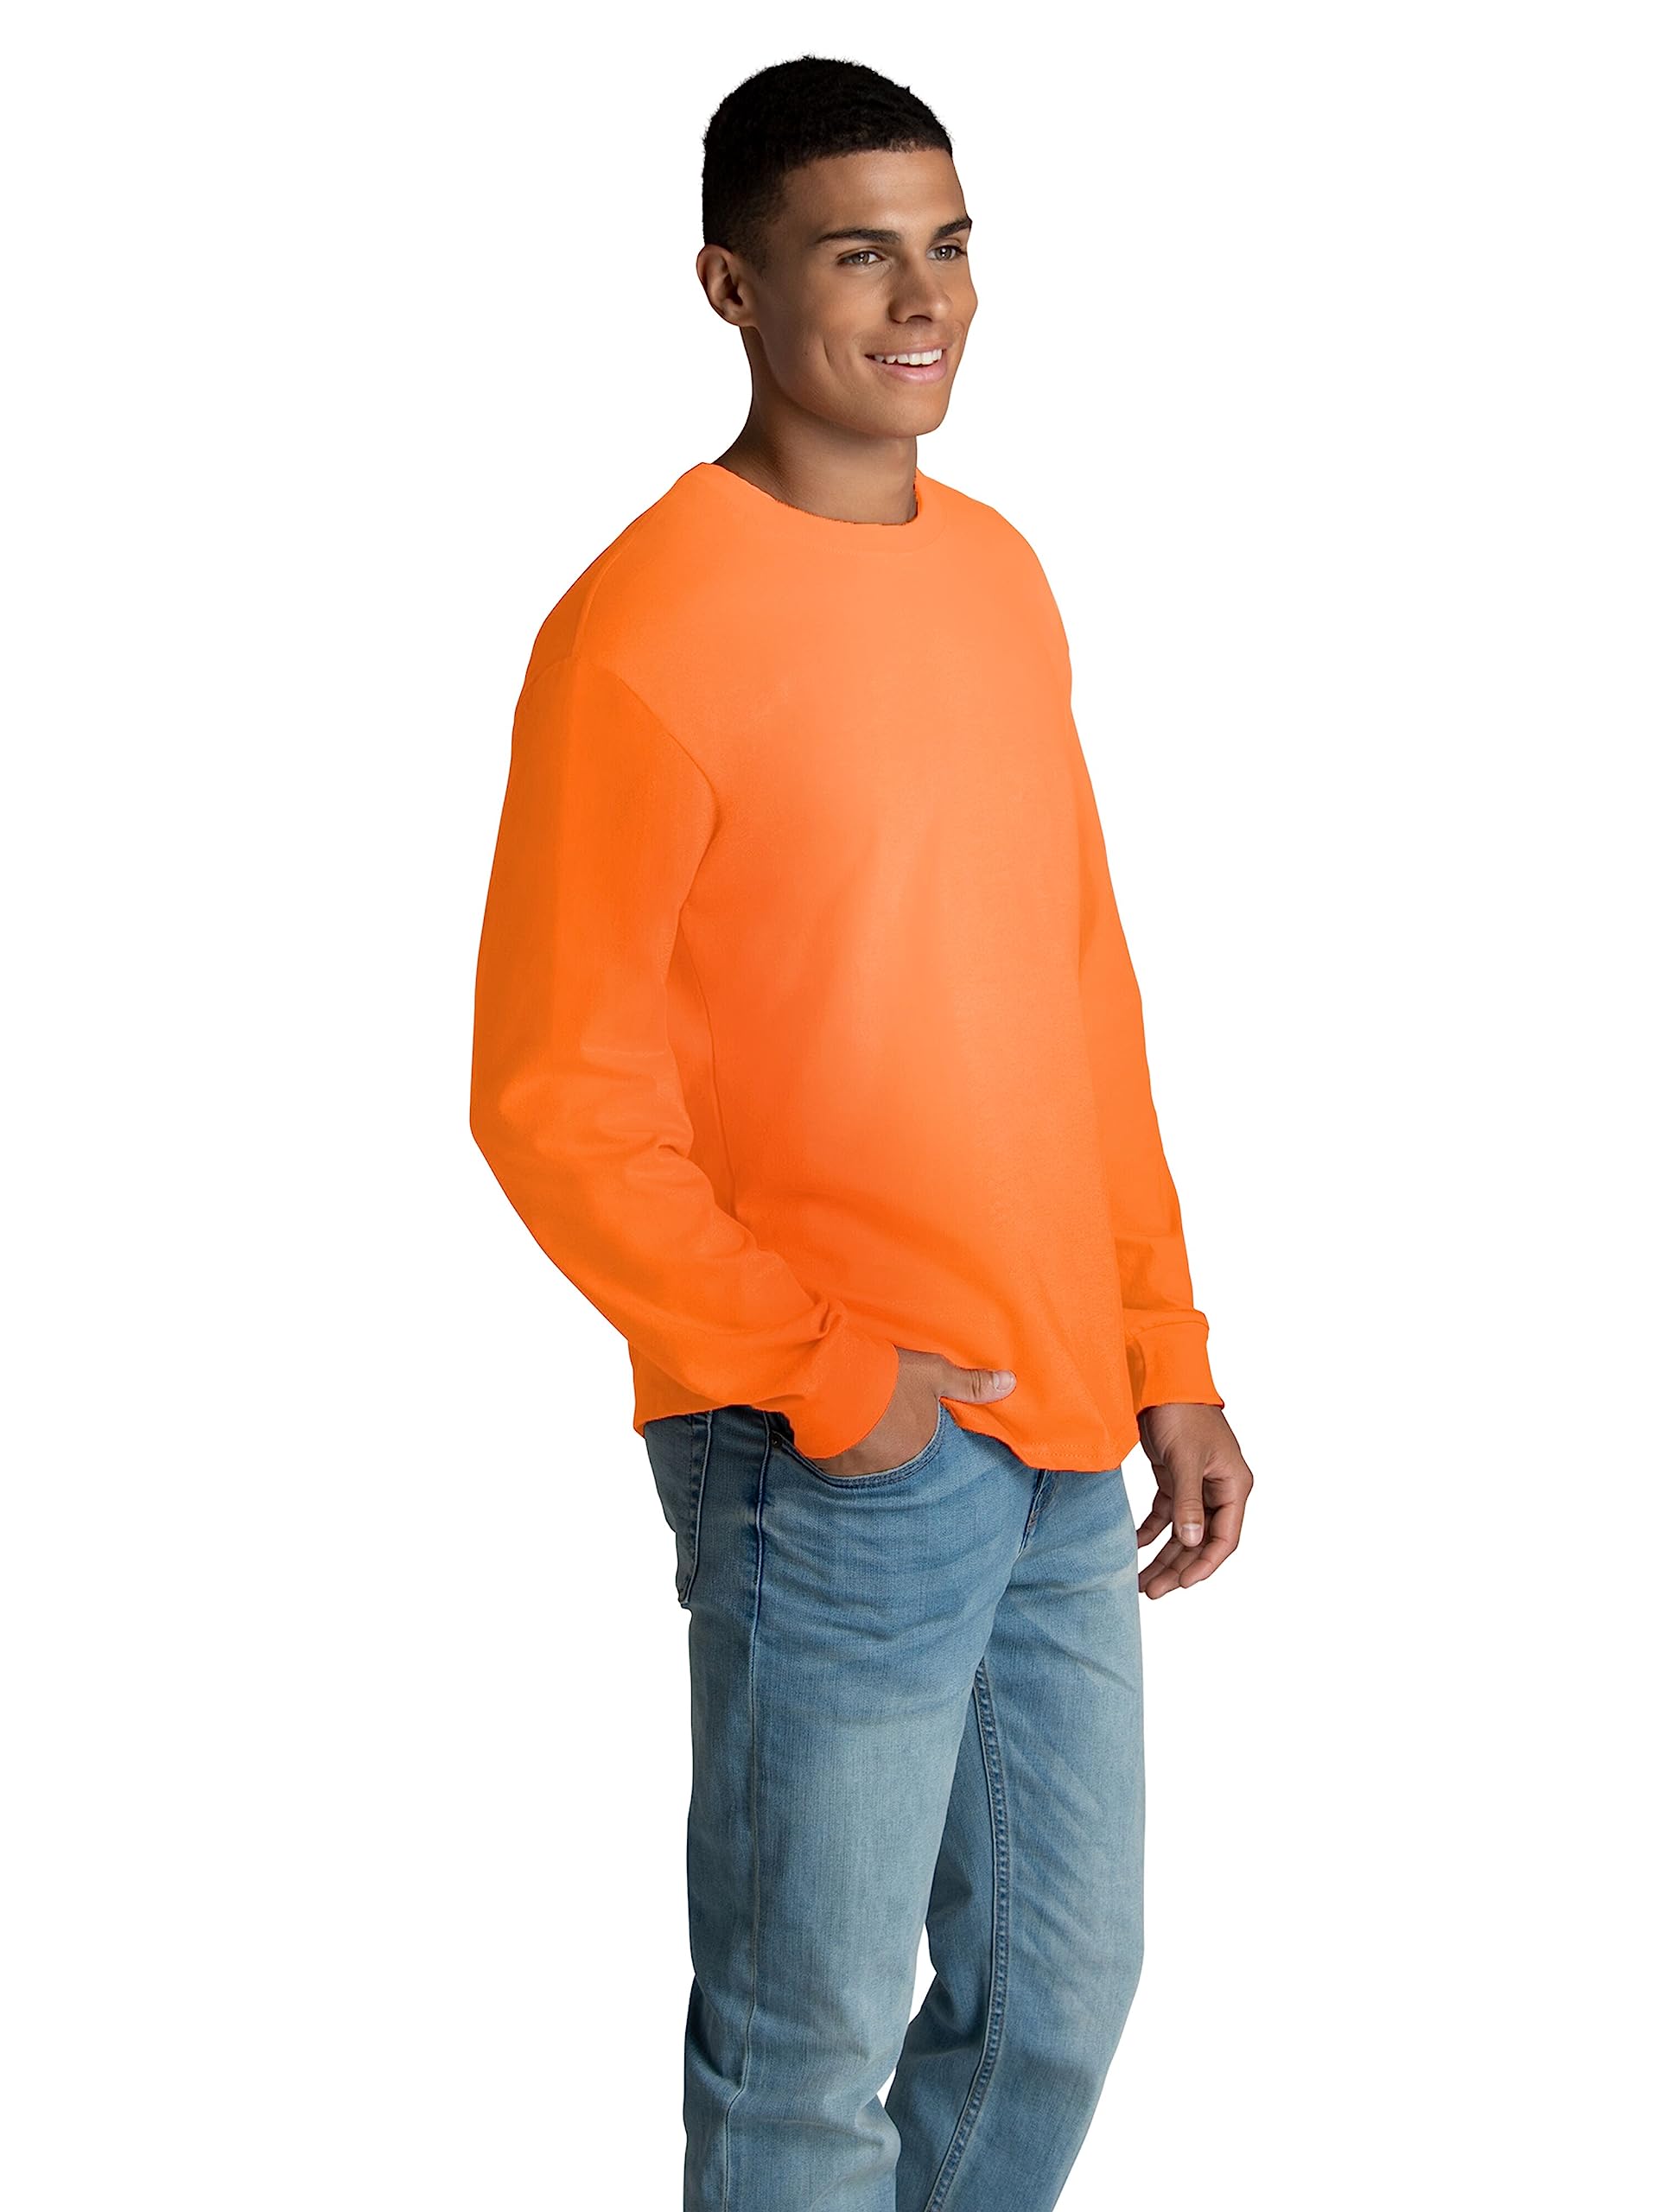 Fruit of the Loom Men's Eversoft Cotton Long Sleeve T Shirts, Breathable & Moisture Wicking with Odor Control, Sizes S-4x